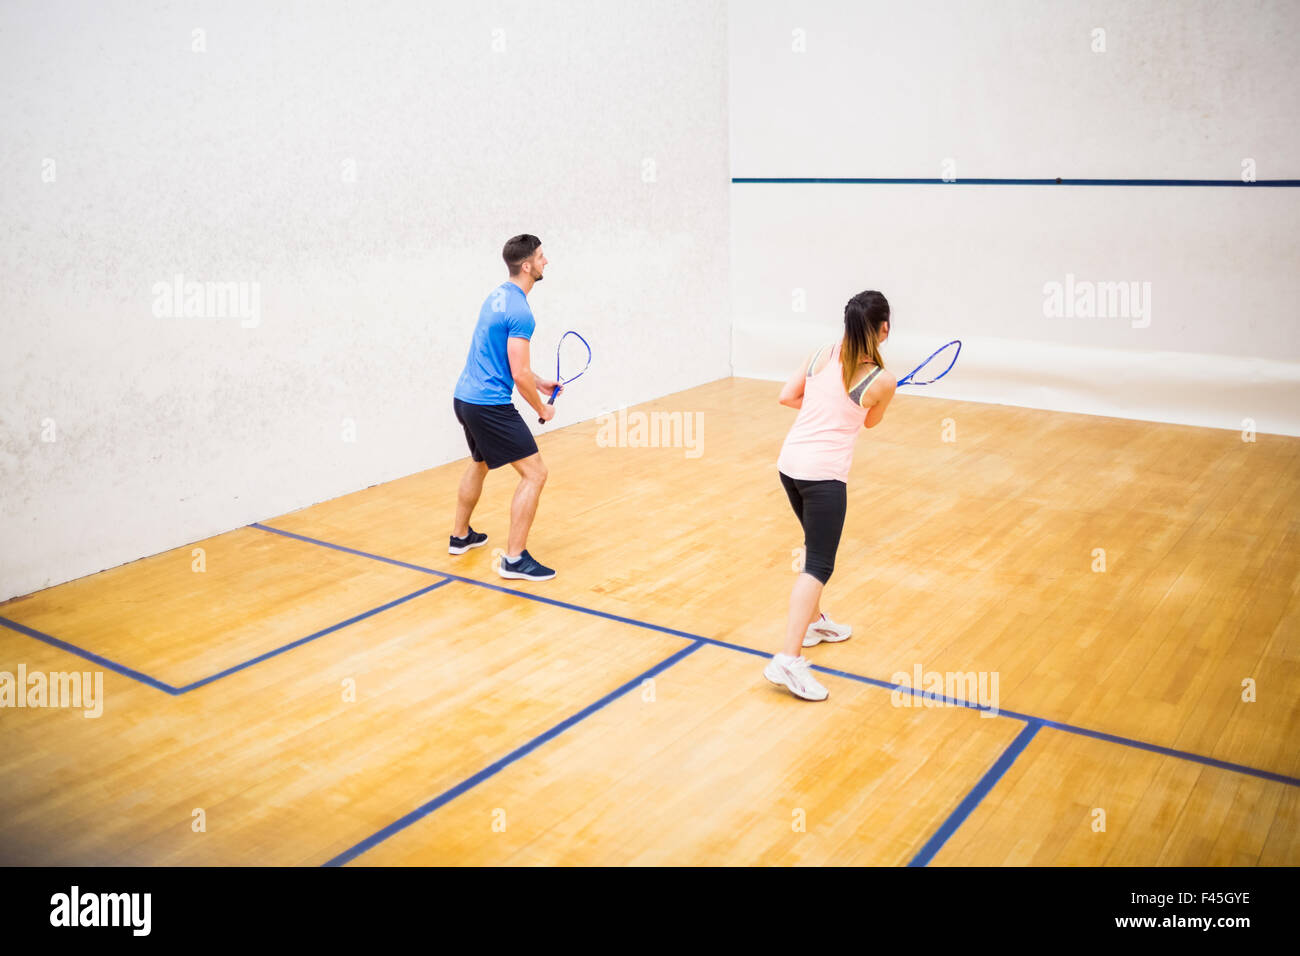 Couple playing a game of squash Stock Photo